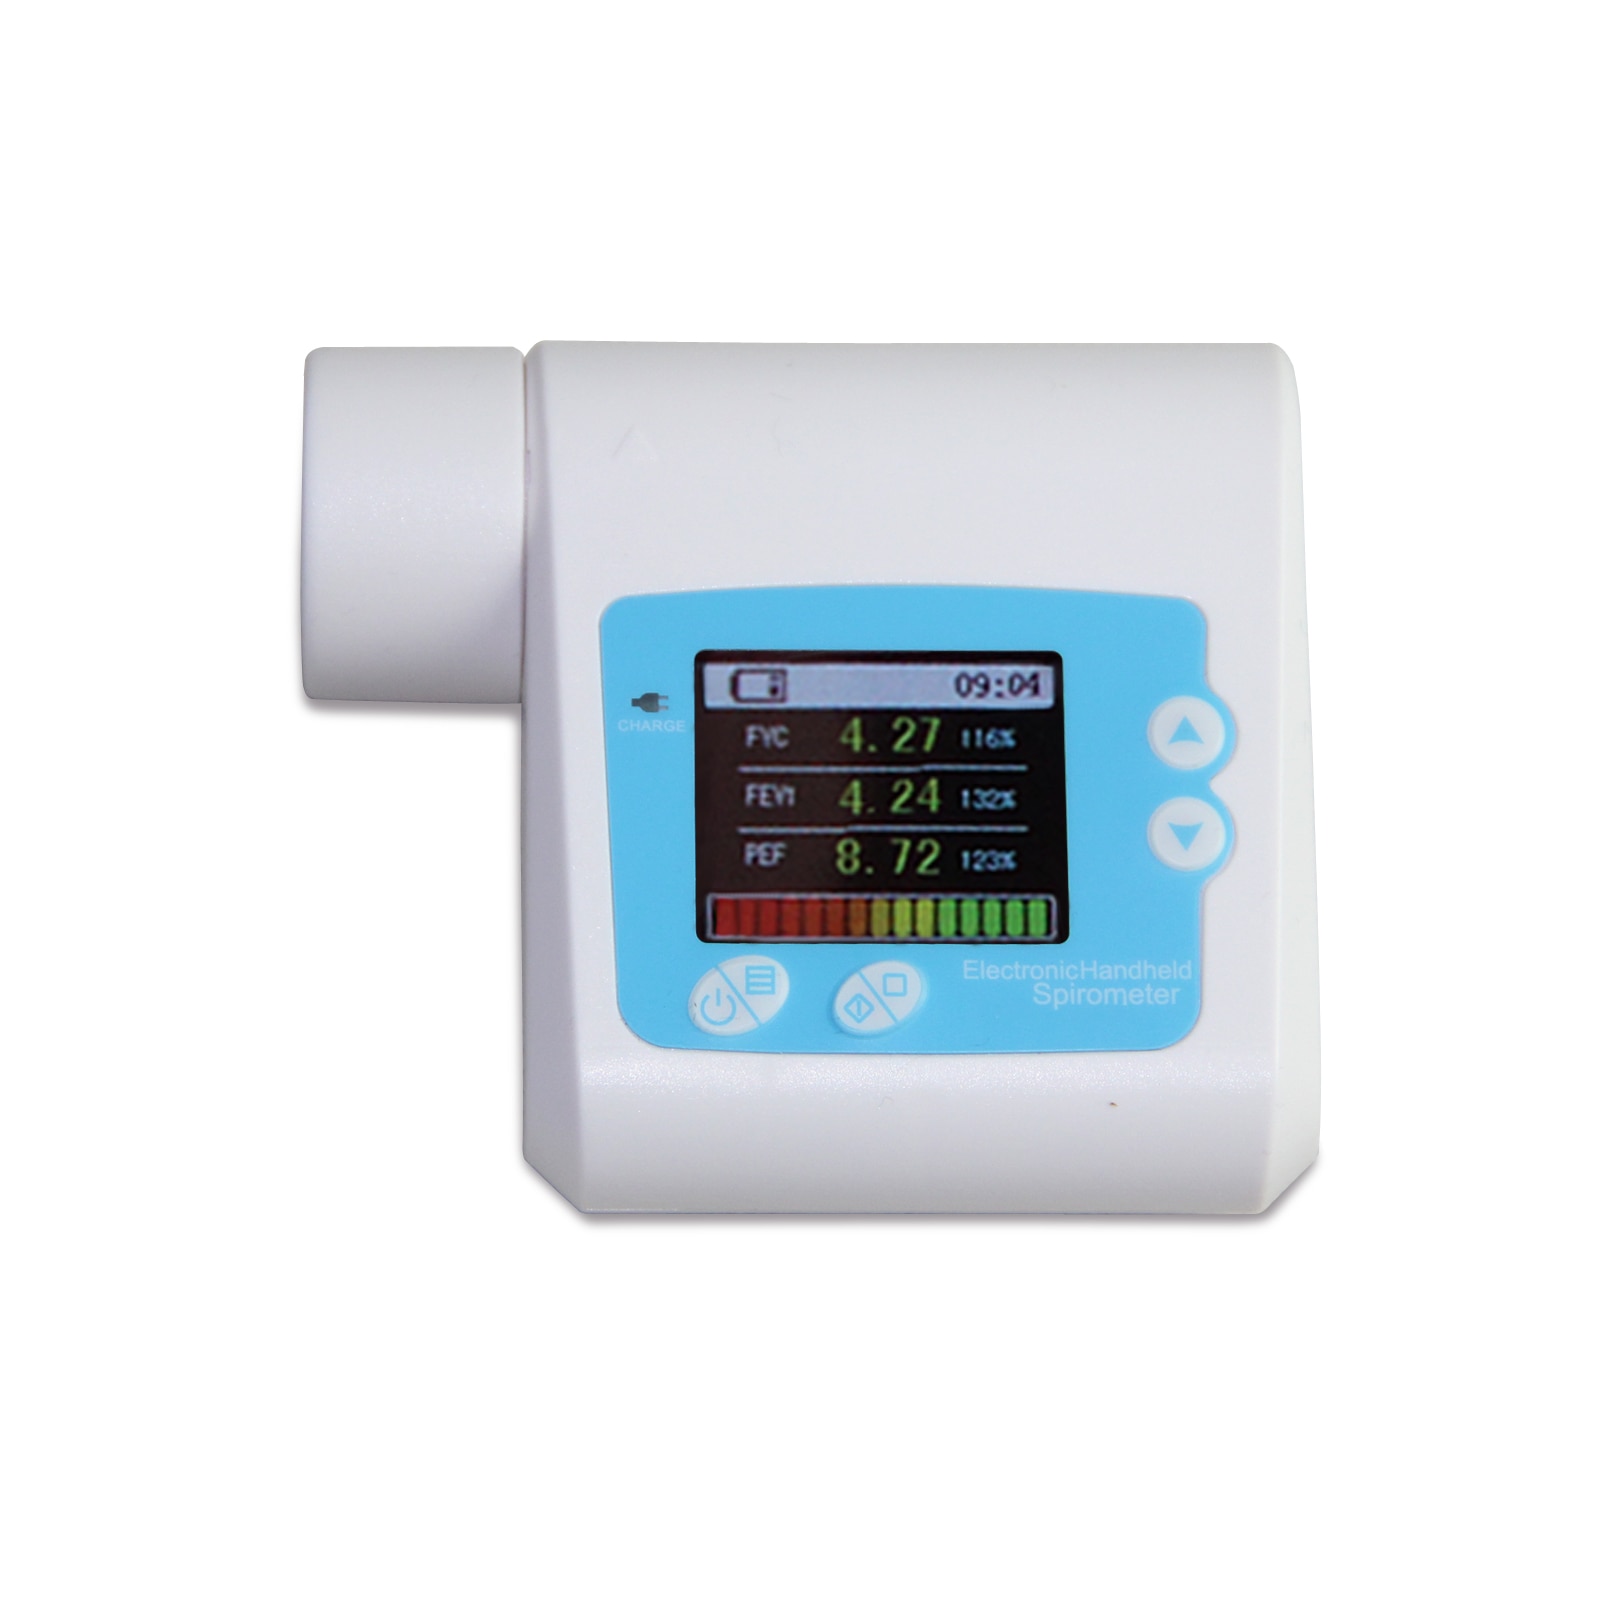 Bluetooth SP10W Digital Spirometer Lung Function Breathing Respiratory Diagnosis Monitor with 10PCS Mouthpiece PC Software